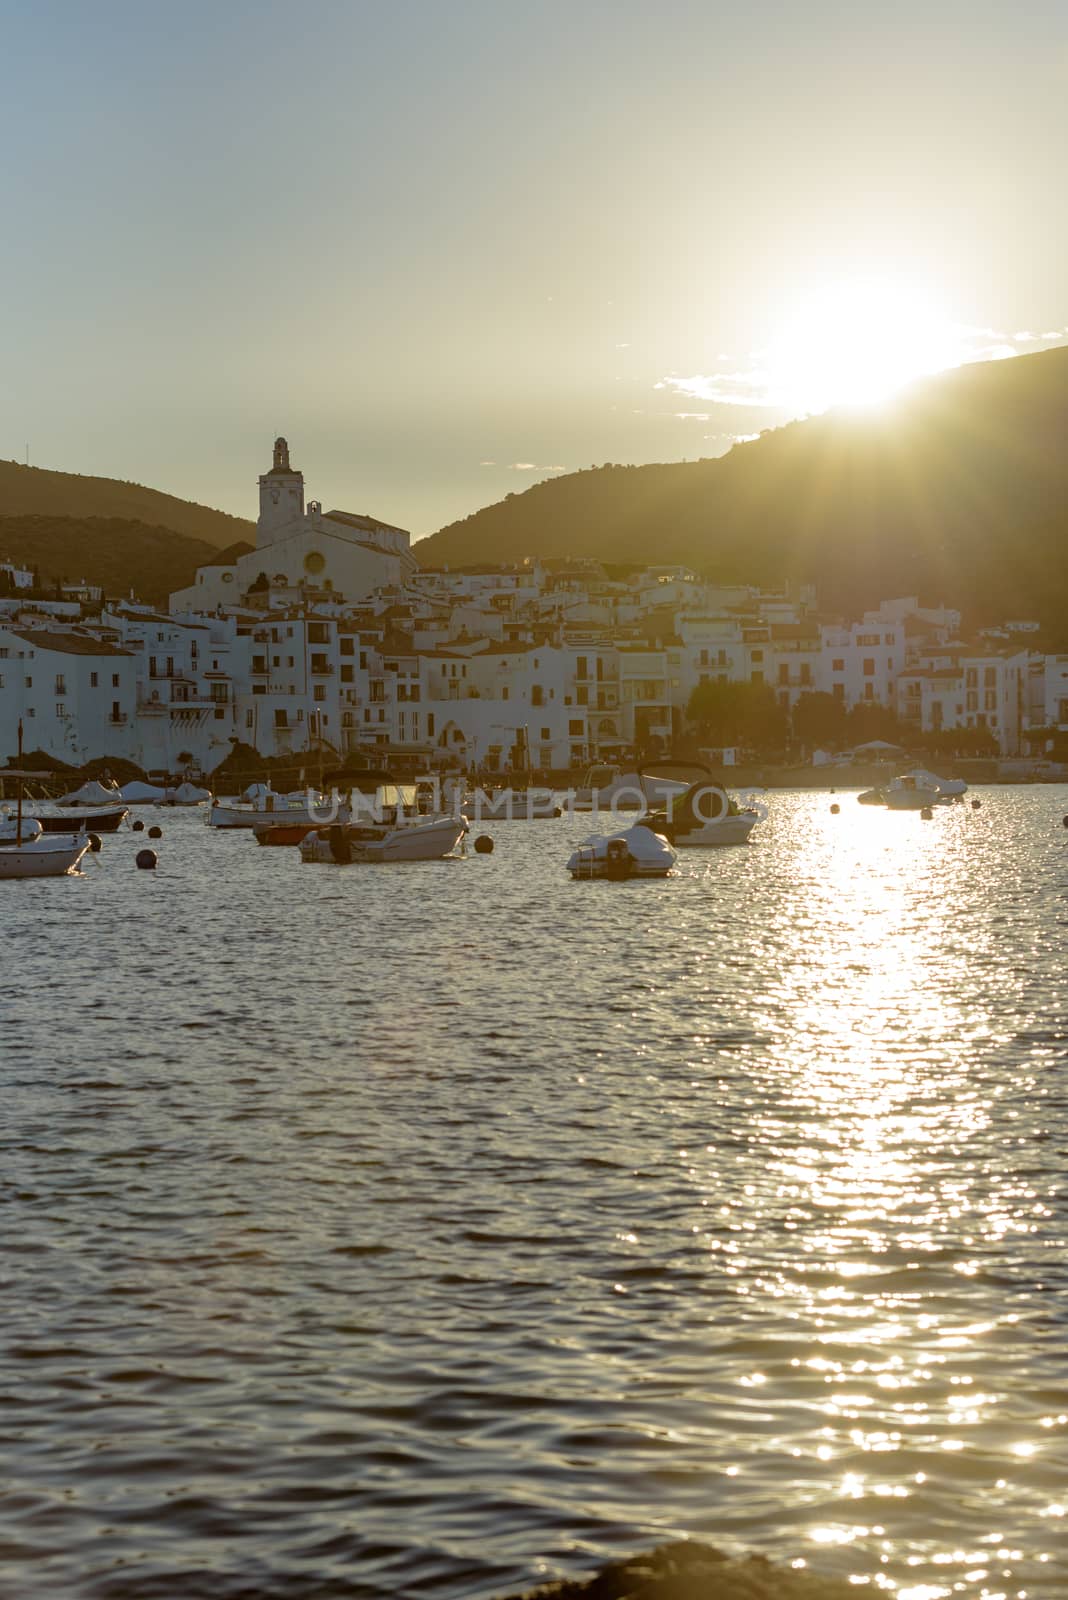 Boats in the beach and houses of the village of Cadaques, Spain  by martinscphoto